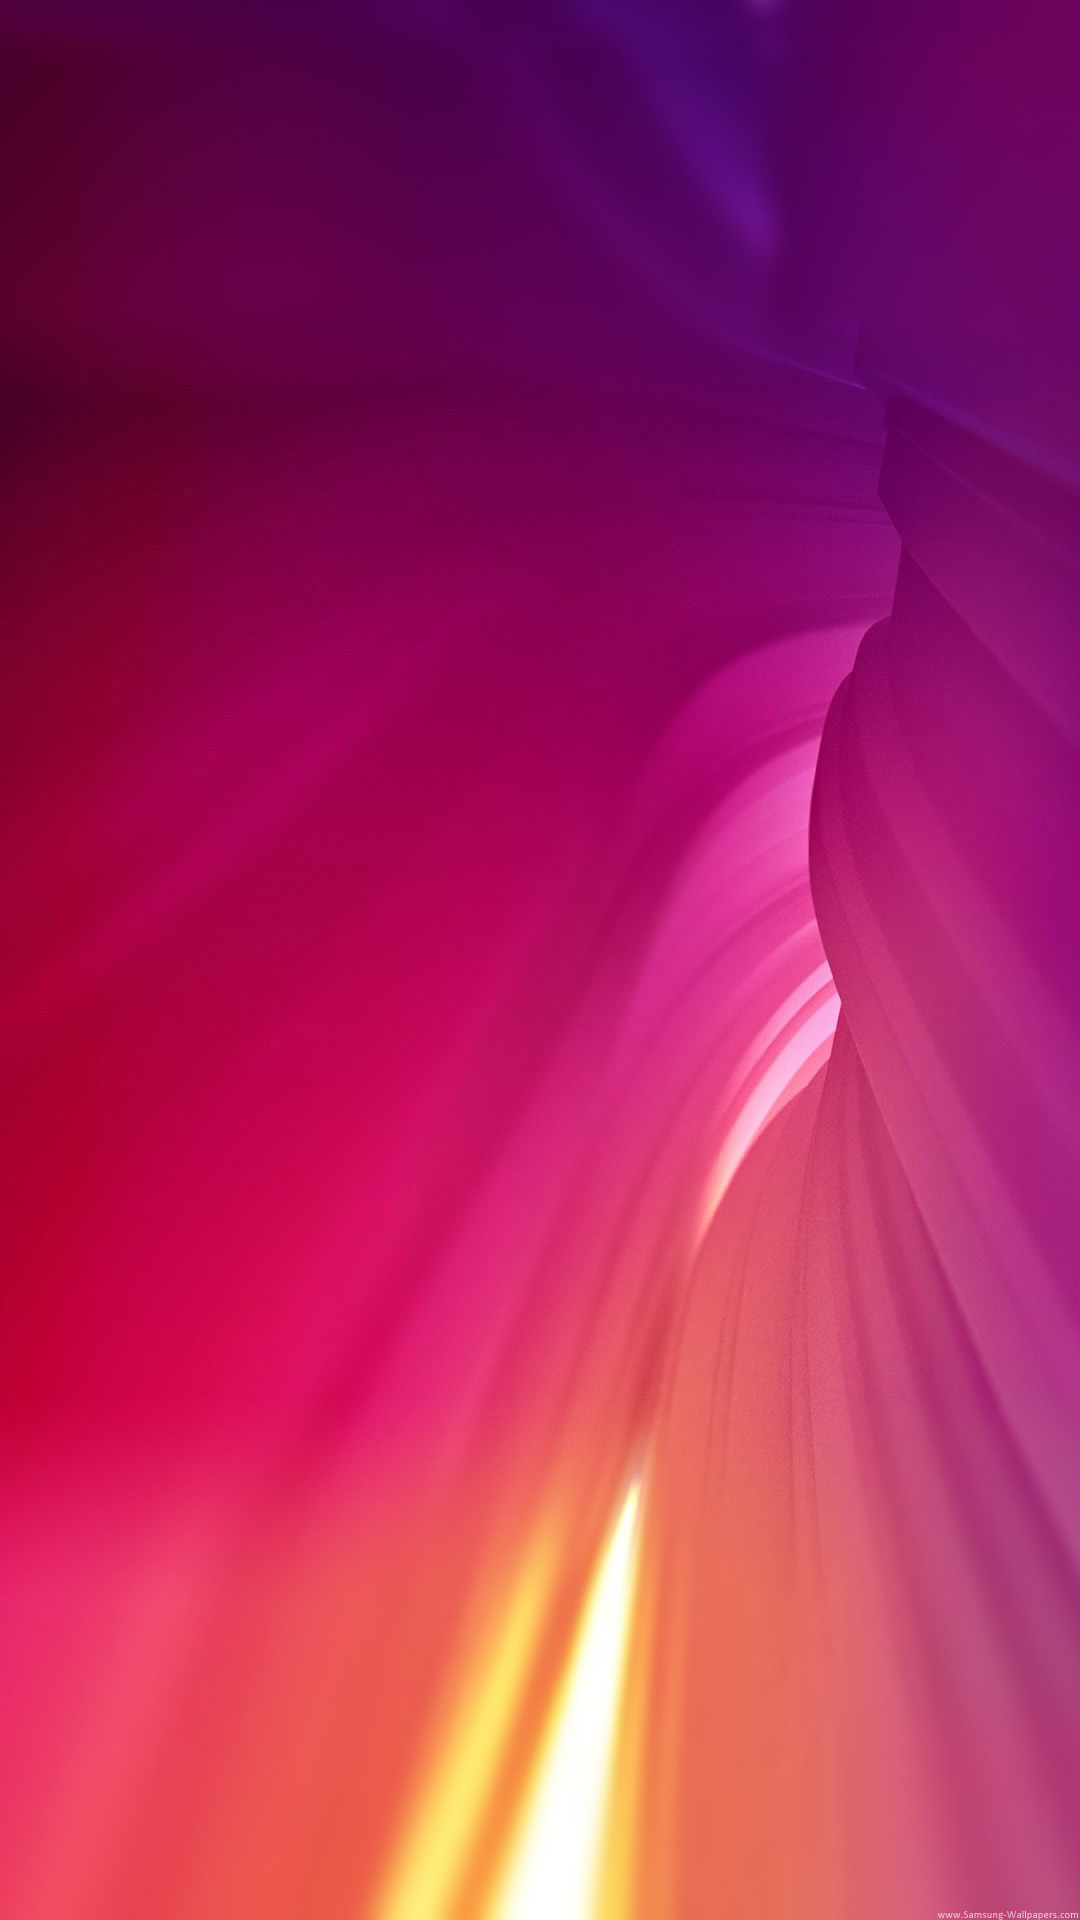 Free Download Nexus7 Wallpapers By Stock Wallpapers 1080x19 For Your Desktop Mobile Tablet Explore 48 Google Nexus 7 Wallpaper Download Free Nexus Wallpapers Nexus 7 Wallpaper Location Nexus 7 Wallpapers App